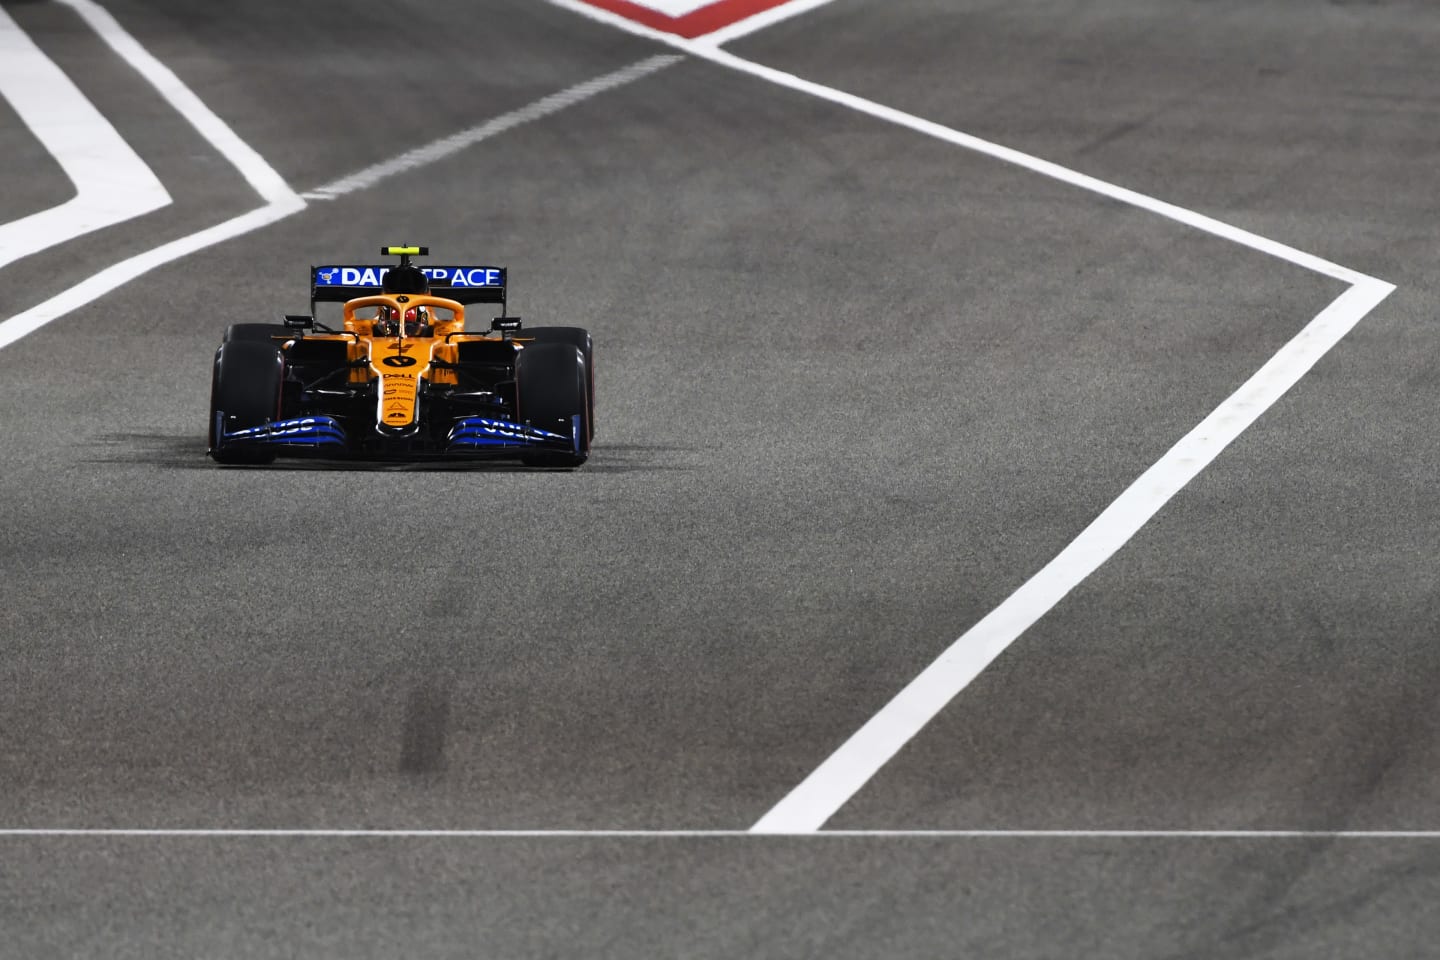 BAHRAIN, BAHRAIN - DECEMBER 04: Lando Norris of Great Britain driving the (4) McLaren F1 Team MCL35 Renault on track during practice ahead of the F1 Grand Prix of Sakhir at Bahrain International Circuit on December 04, 2020 in Bahrain, Bahrain. (Photo by Rudy Carezzevoli/Getty Images)